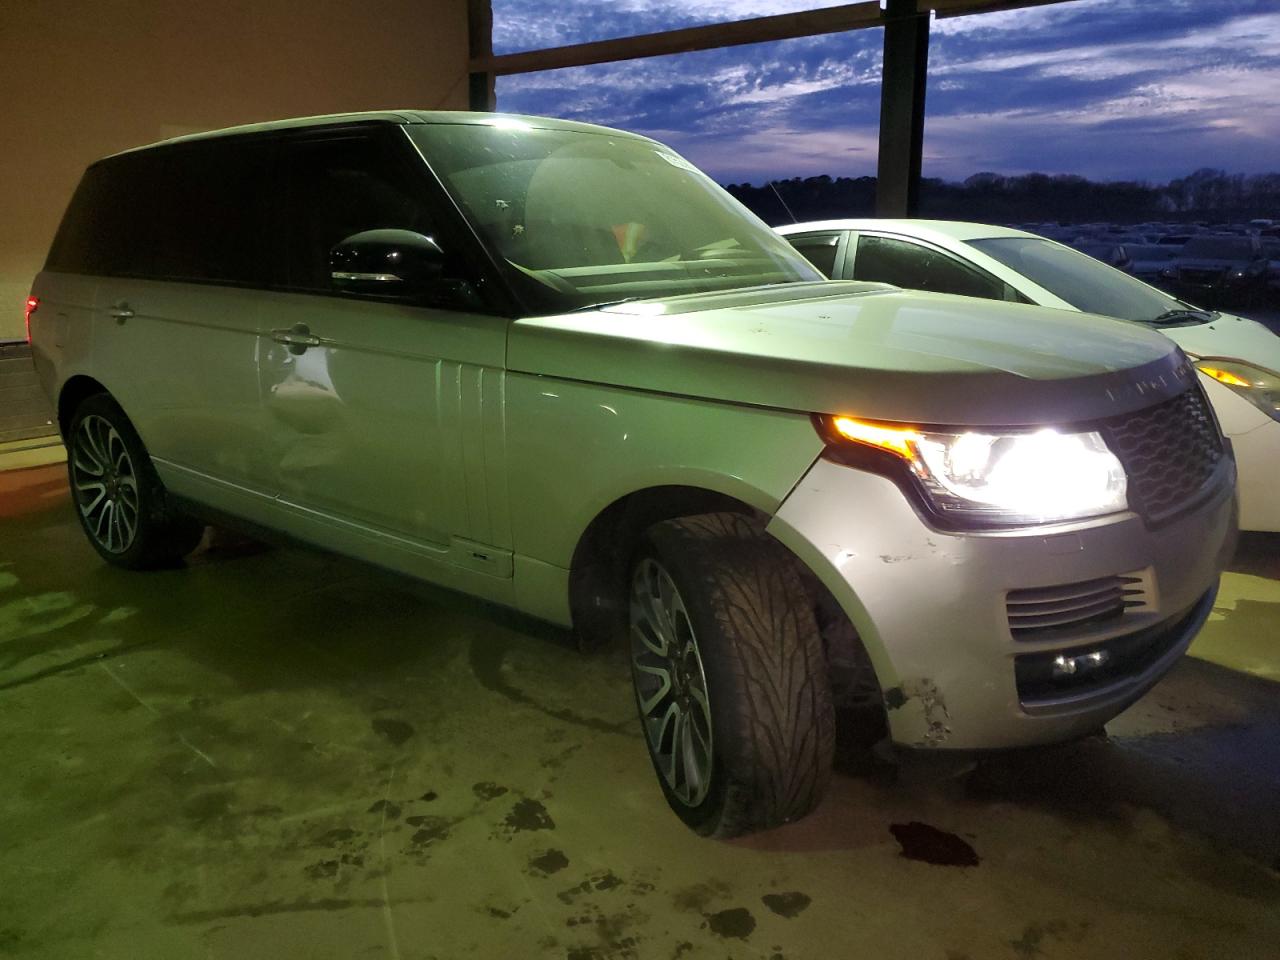 SALGS3EF7GA****** Salvage and Wrecked 2016 Land Rover Range Rover in Alabama State